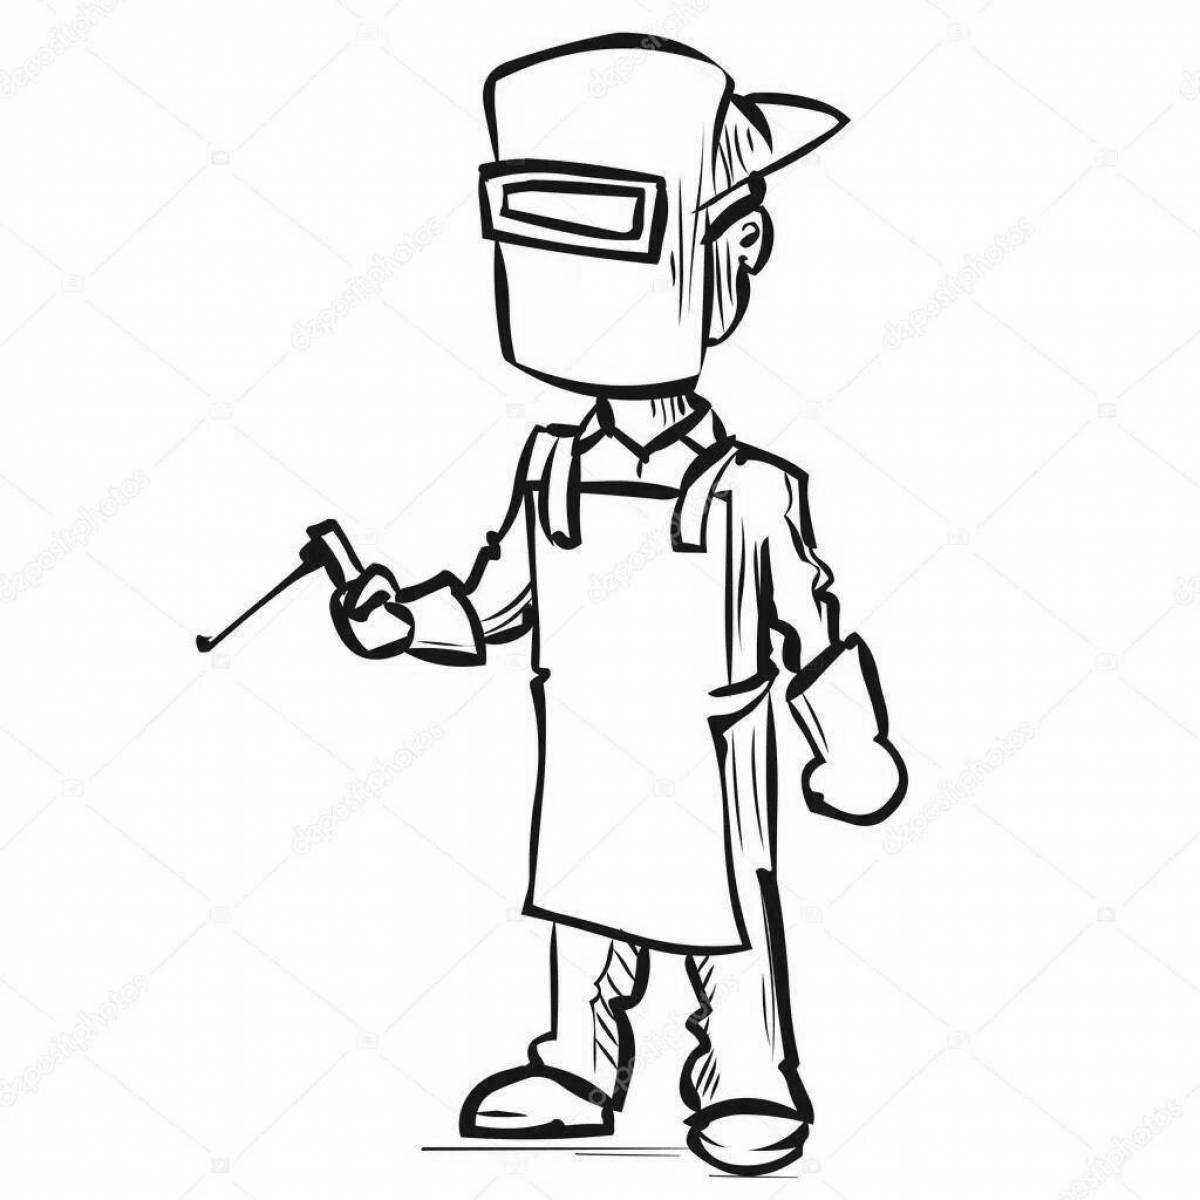 Coloring page adorable welder